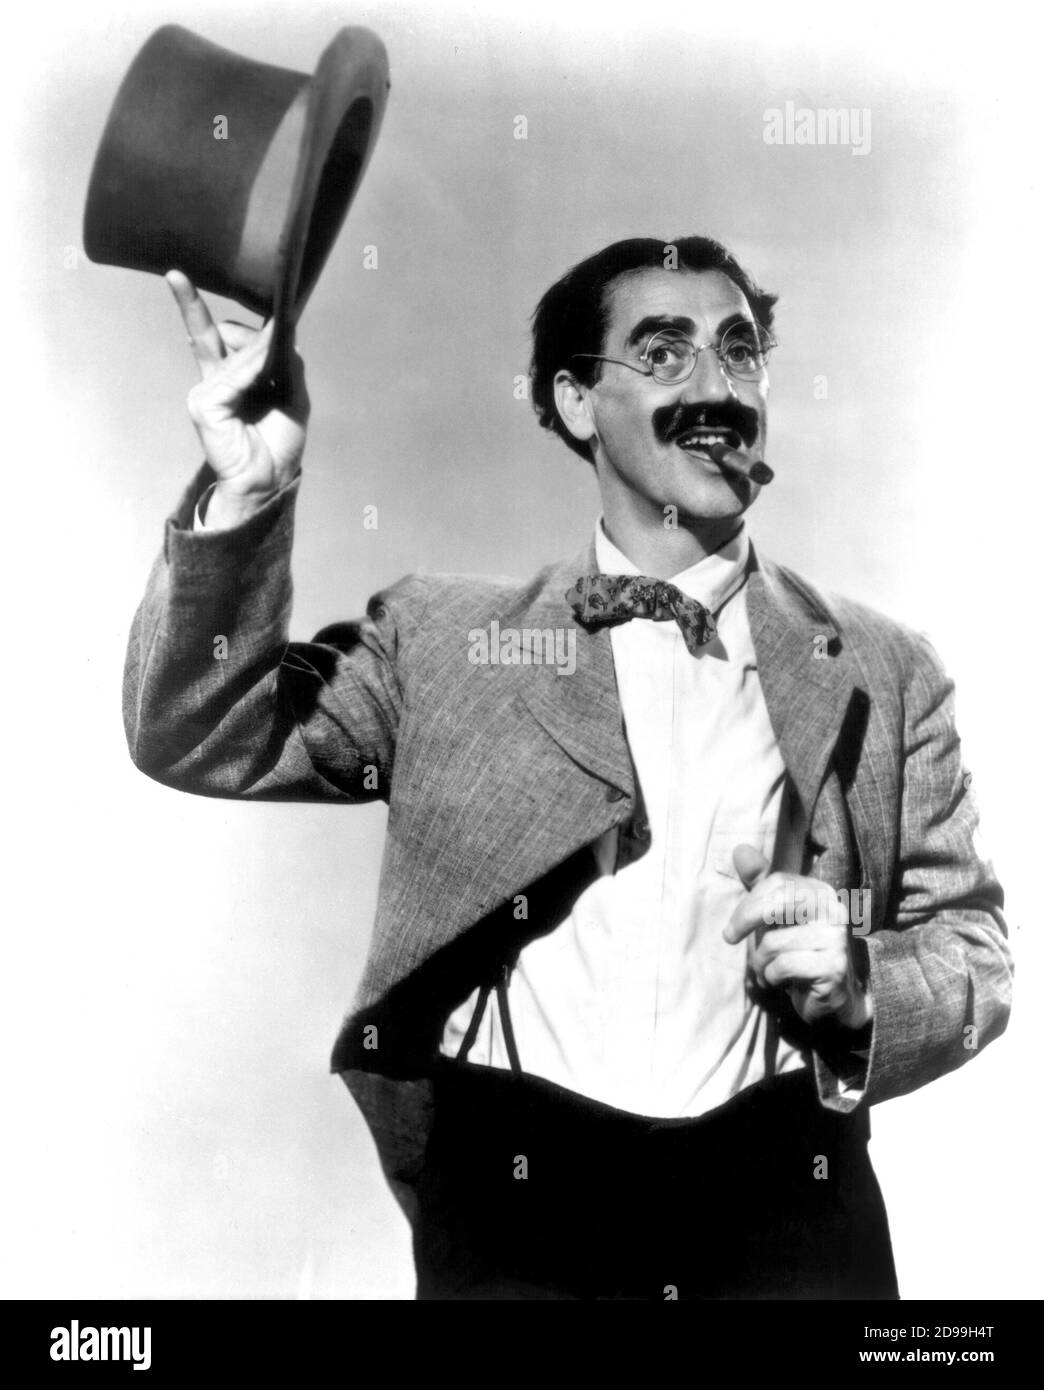 1939  , USA:  GROUCHO  MARX ( 1895 - 1977 ) of The Marx Brothers , pubblicity still for the movie AT THE CIRCUS ( Tre pazzi a zonzo ) by Edward Buzzell .  - FRATELLI MARX - Cappello a cilindro - Top Hat - bretelle - braces - suspenders- papillon - sigaro - cigar ----   Archivio GBB Stock Photo